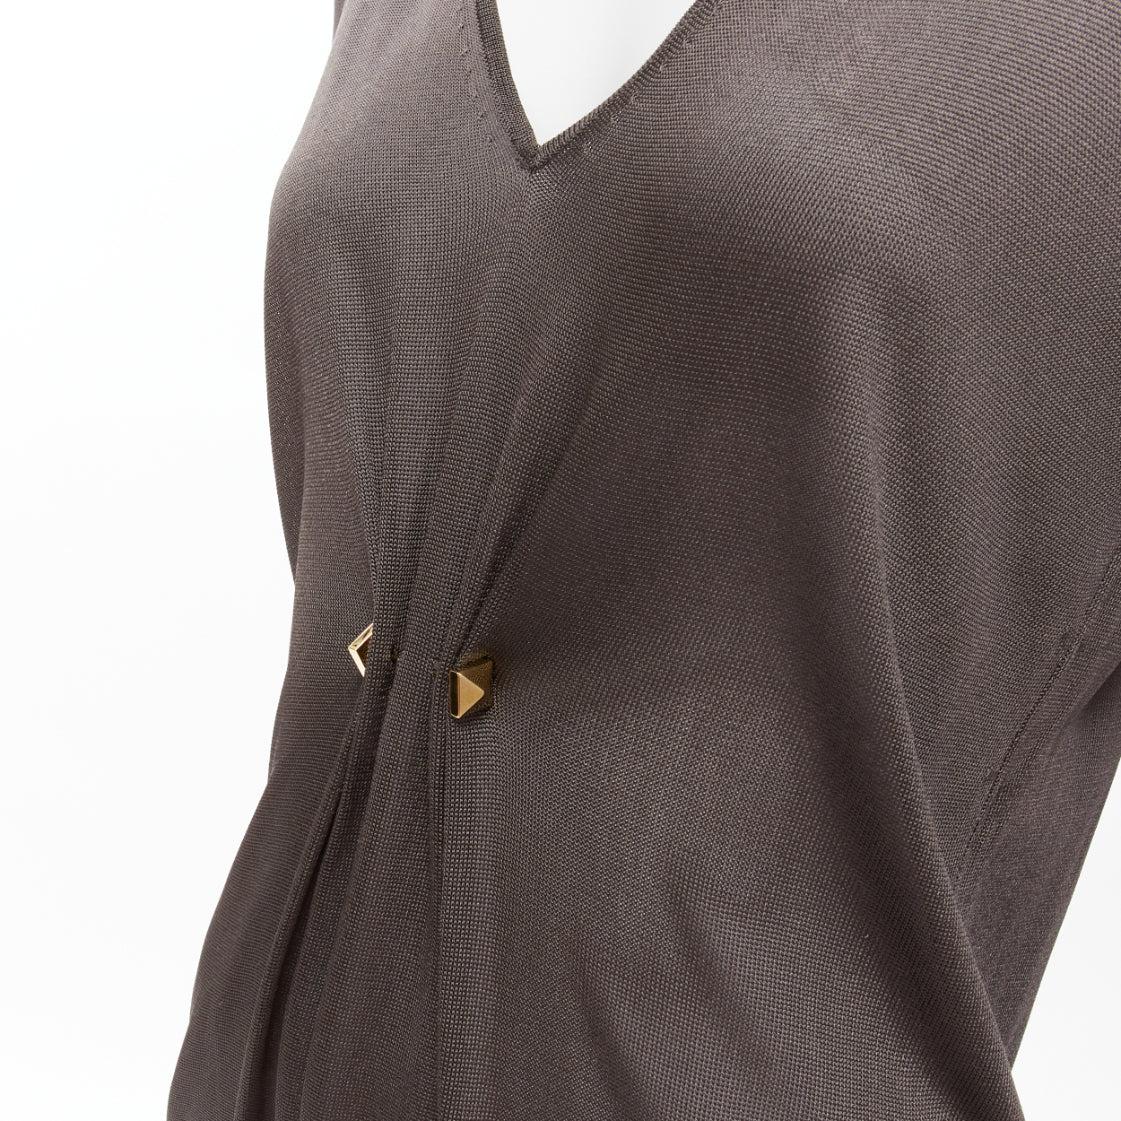 GUCCI dark brown gold minimal stud piercing sheer V neck top IT44 L
Reference: GIYG/A00340
Brand: Gucci
Material: Viscose
Color: Brown
Pattern: Solid
Closure: Pullover
Extra Details: Stud piercing detail at front.
Made in: